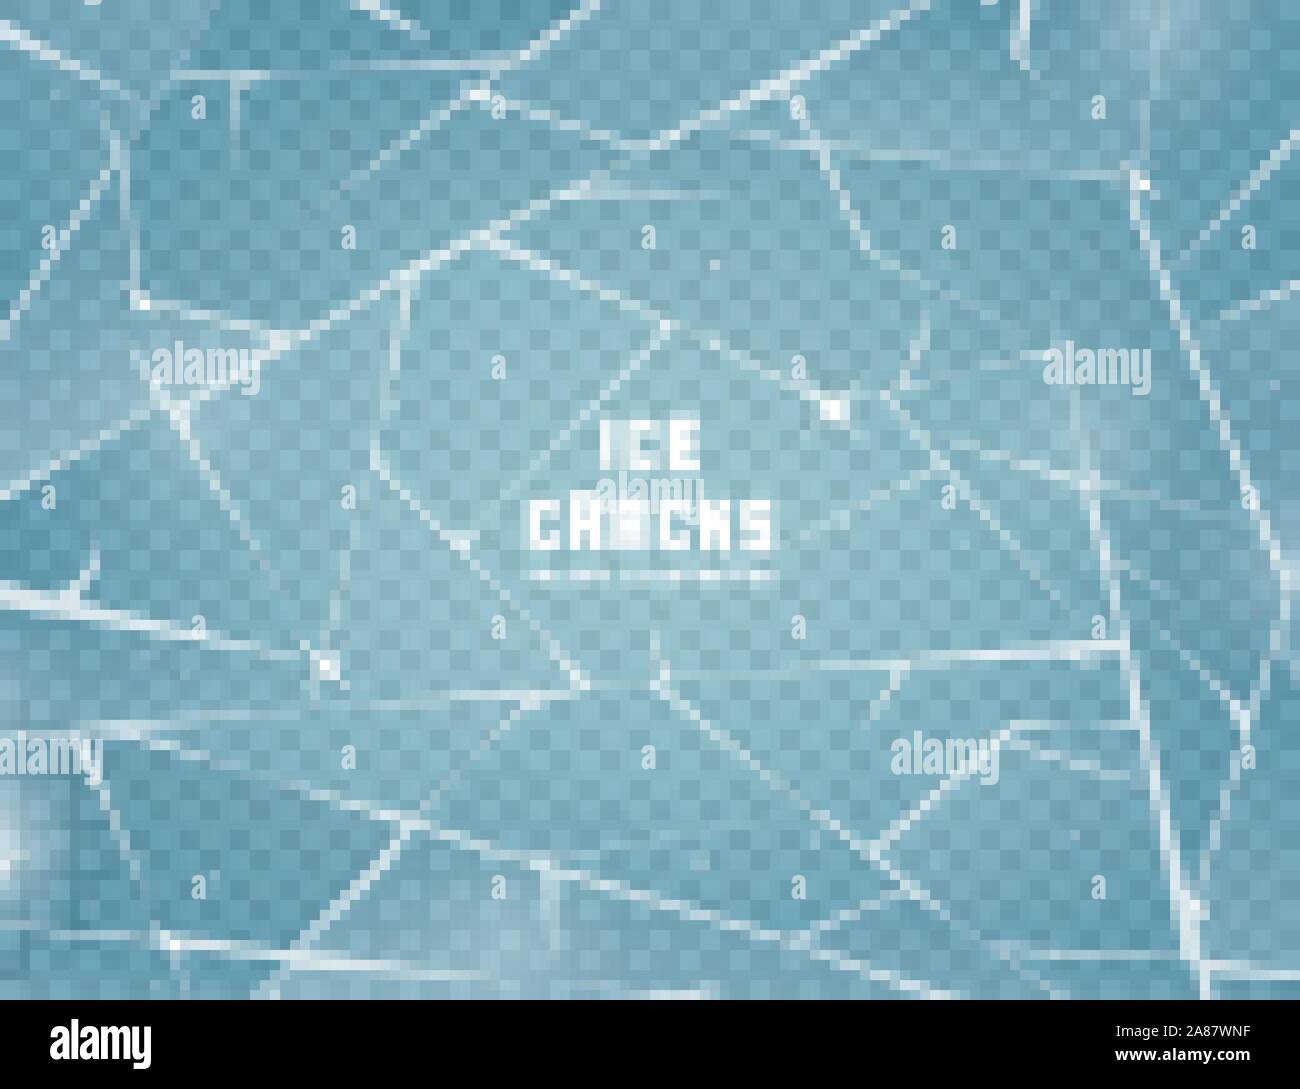 Realistic cracked ice surface. Frozen glass with cracks and scratches. Vector illustration. Stock Vector